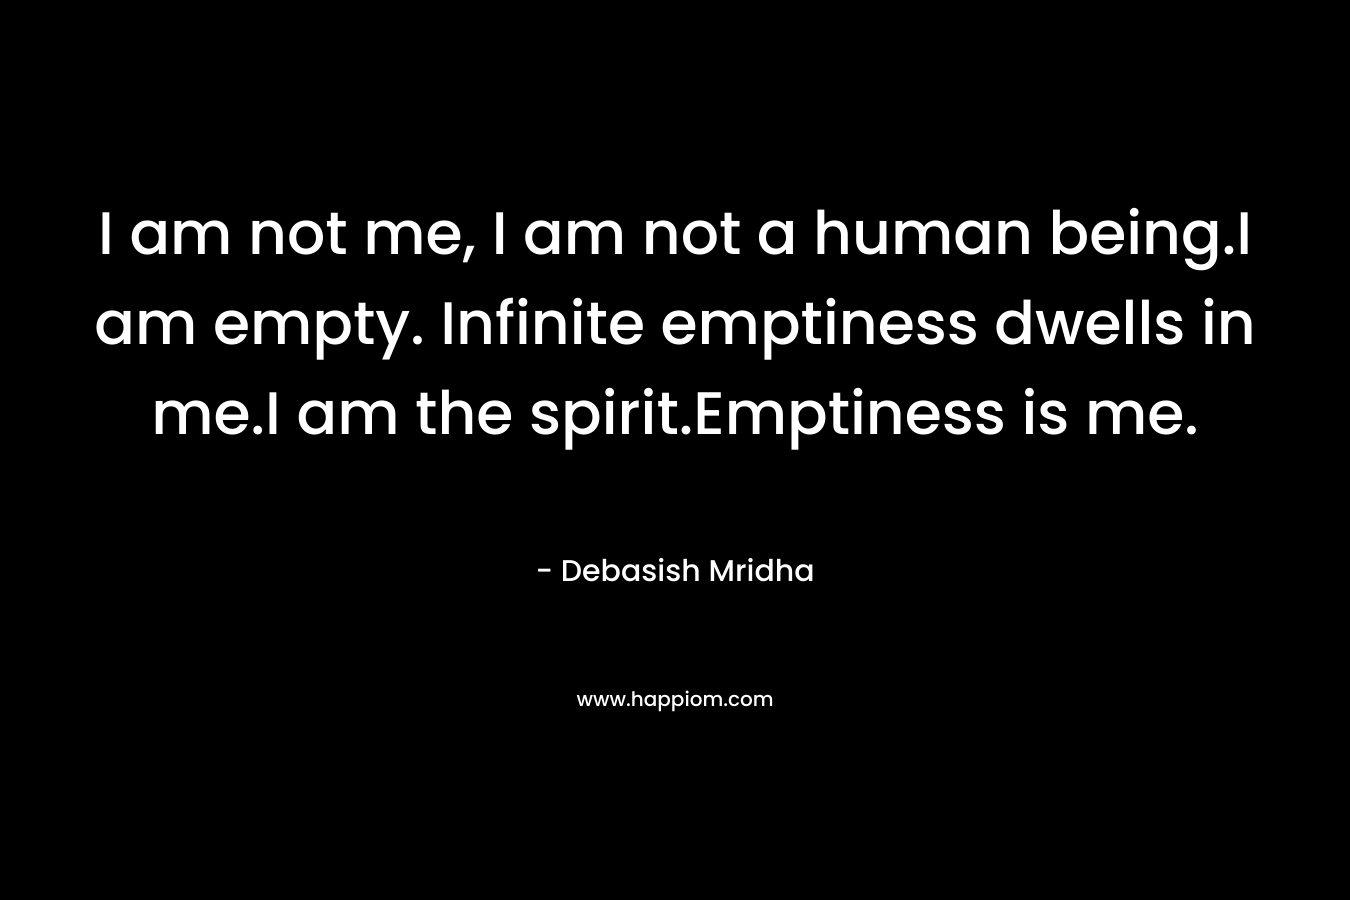 I am not me, I am not a human being.I am empty. Infinite emptiness dwells in me.I am the spirit.Emptiness is me.